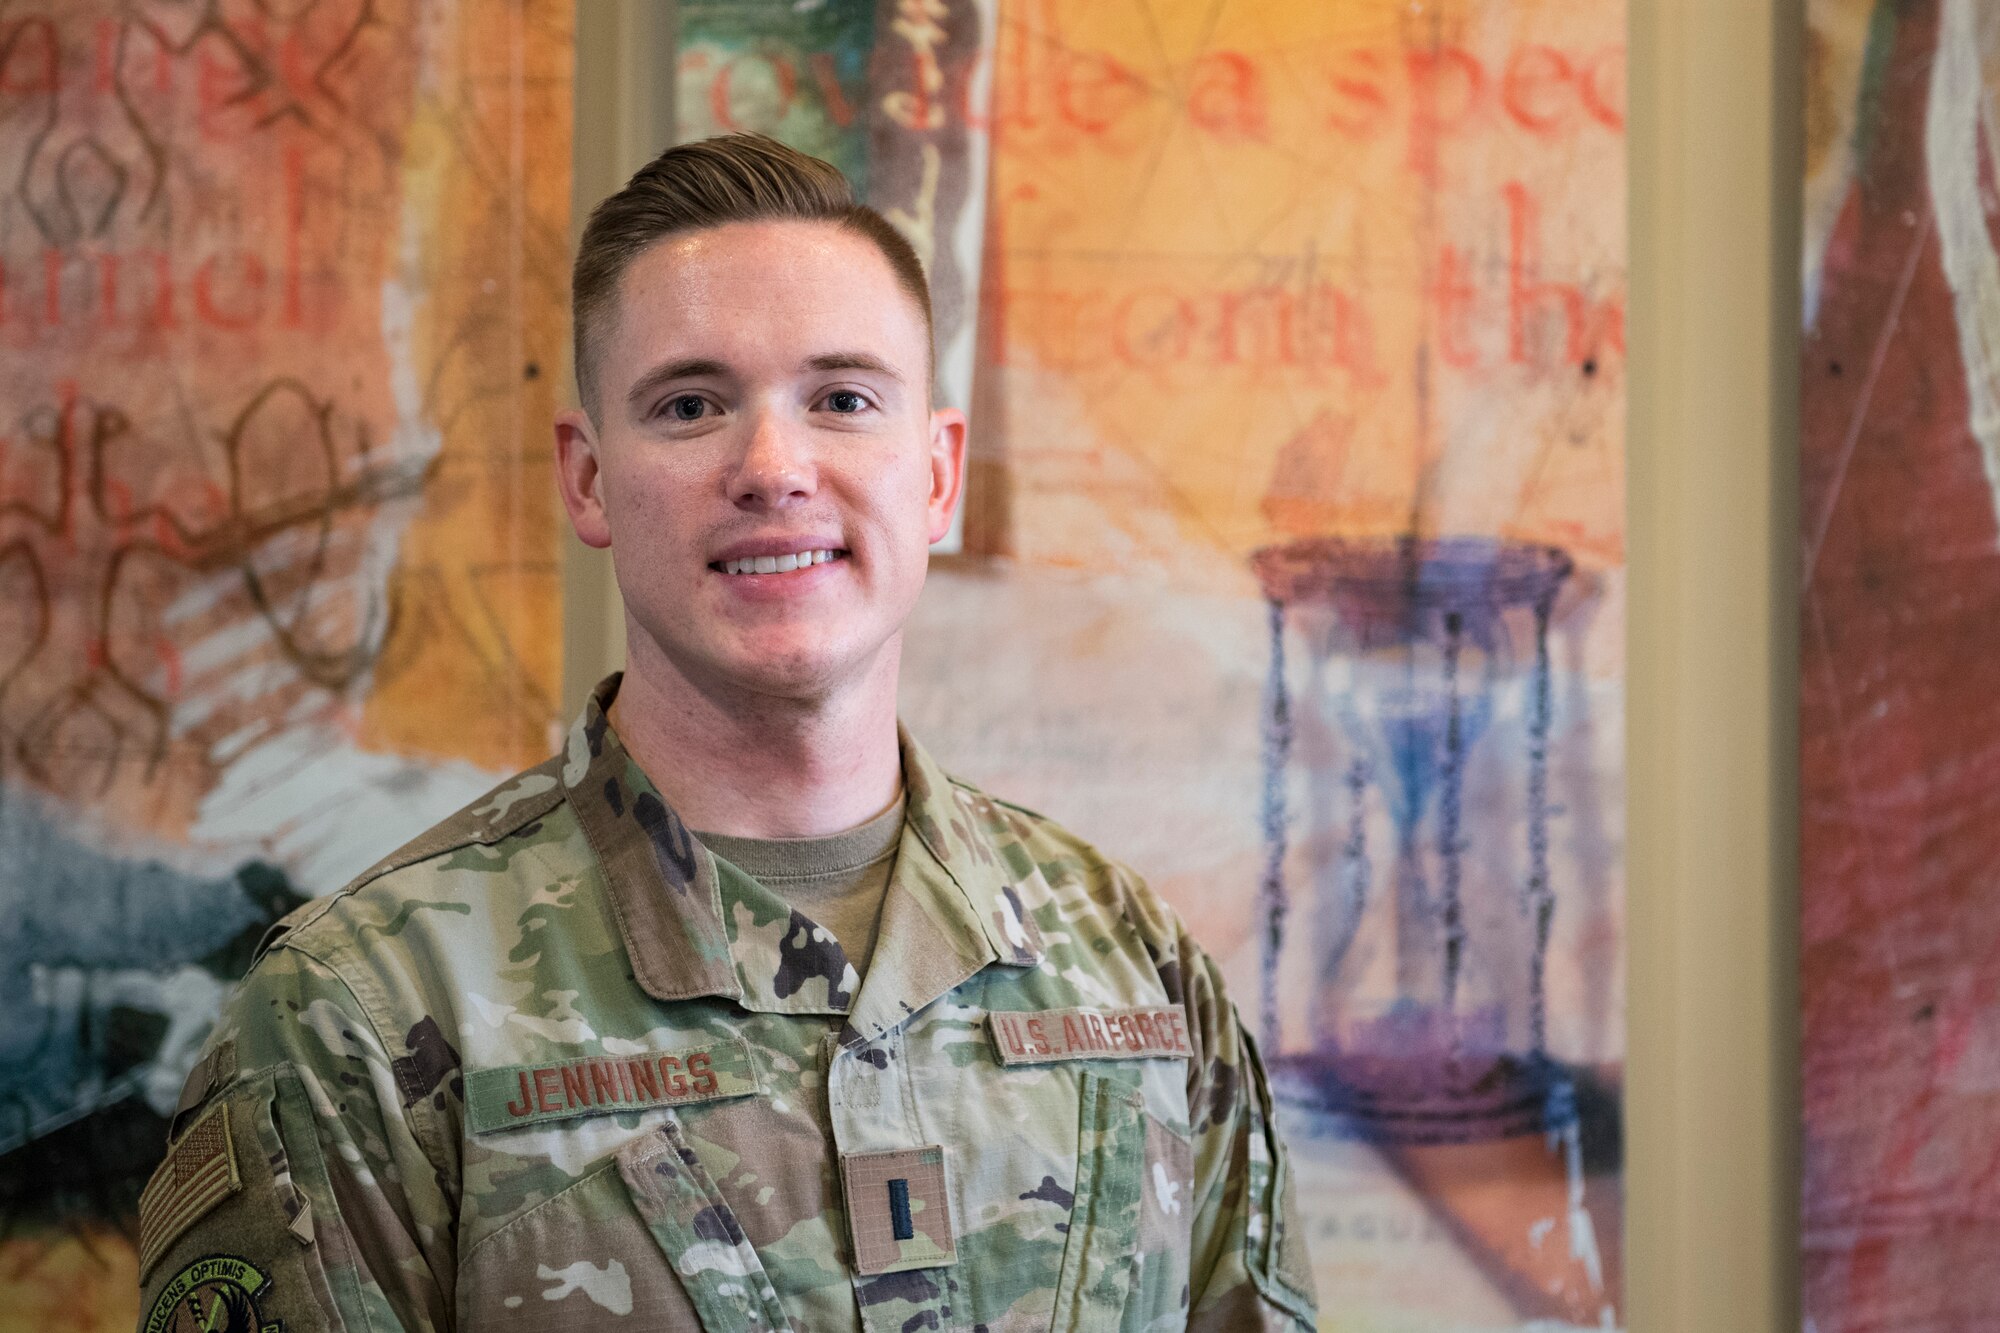 1st Lt. Benjamin Jennings, creator of Standard Template Optimization Program (STOP), poses for a photo Sept. 23, 2019, at Incirlik Air Base, Turkey. Jennings created STOP which is a modernization of the Air Force Handbook 33-337 The Tongue and Quill, the primary reference used to standardize documents Air Force-wide. The innovation earned the 39th Air Base Wing’s top spot as this year’s Spark Tank finalist and if selected and funded at the Air Force-level, the program will automatically generate standardized documents and form-fillable templates for a variety of common documents. (U.S. Air Force photo by Staff Sgt. Ceaira Tinsley)